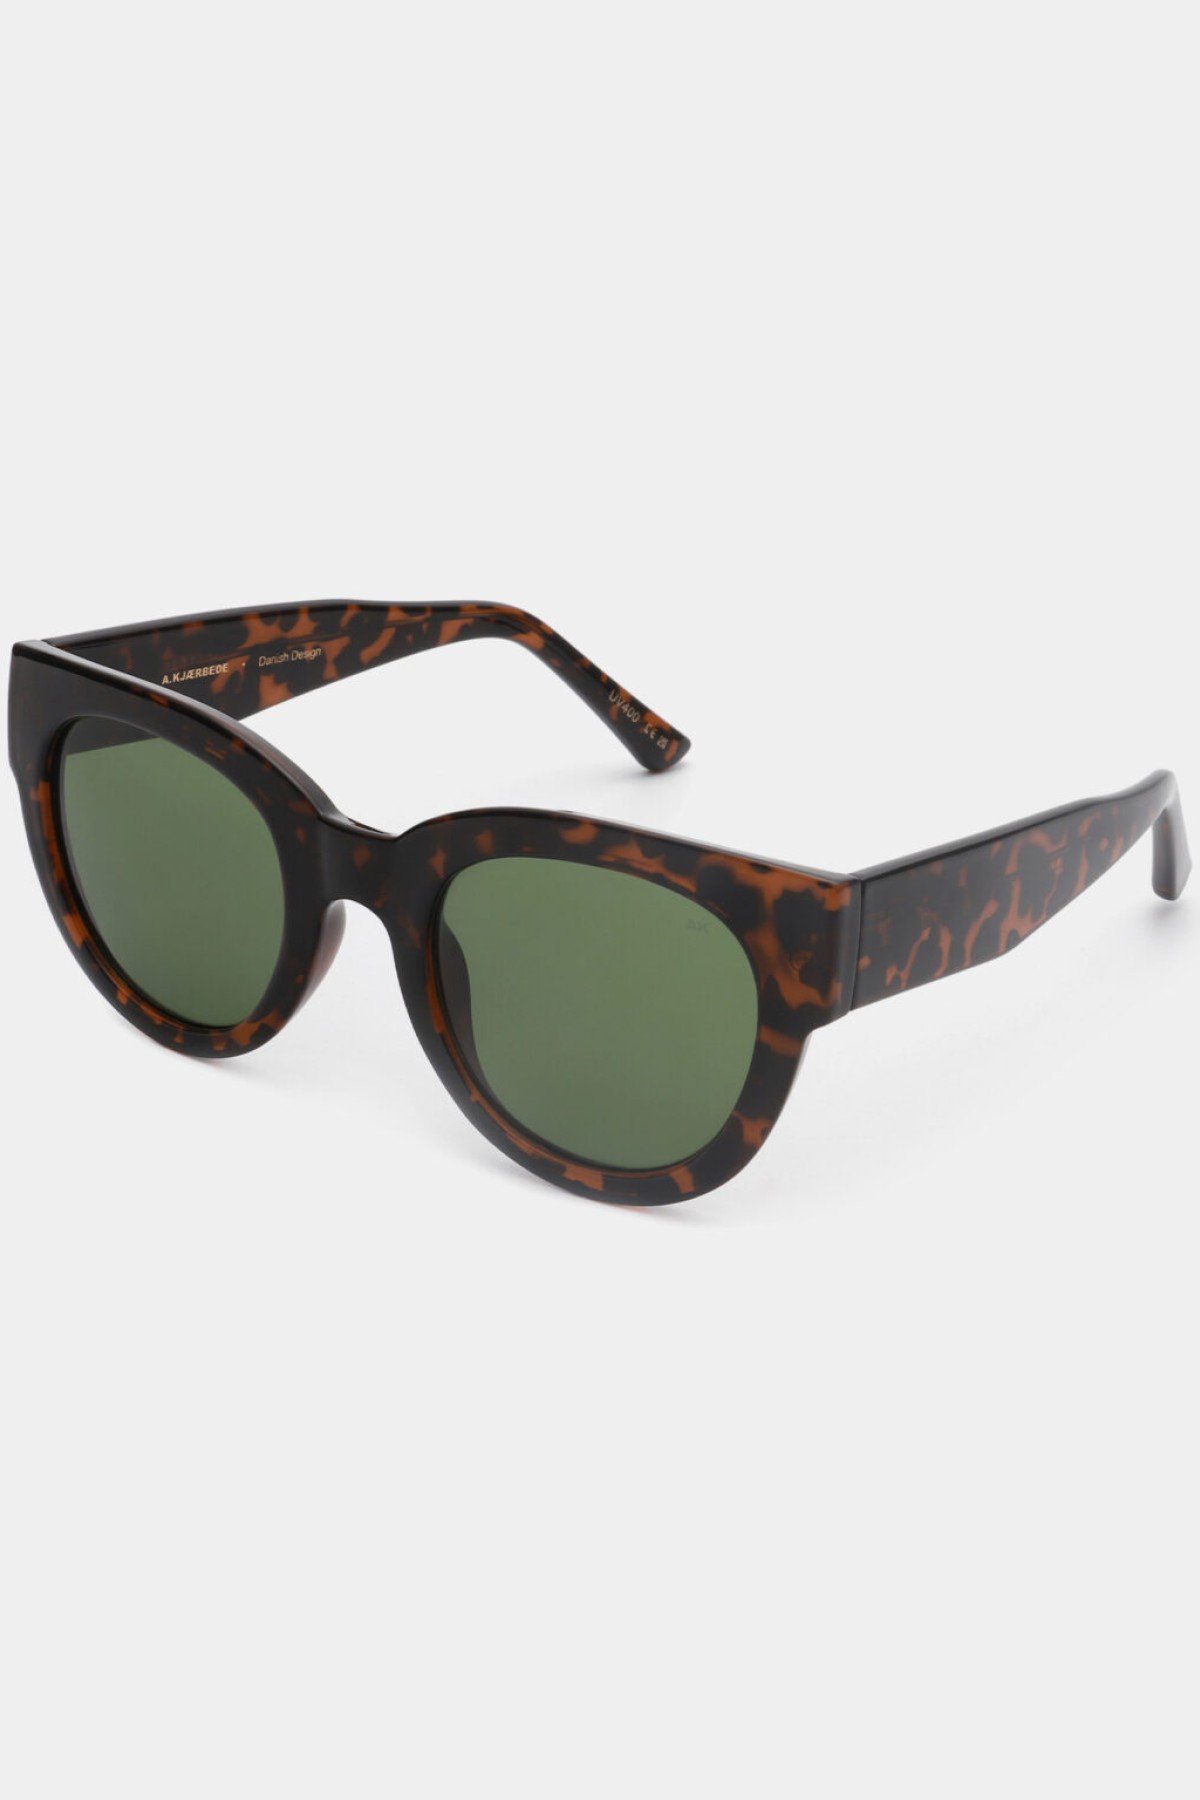 SUNGLASSES TORTOISE - LILLY – UV 400 PROTECTION